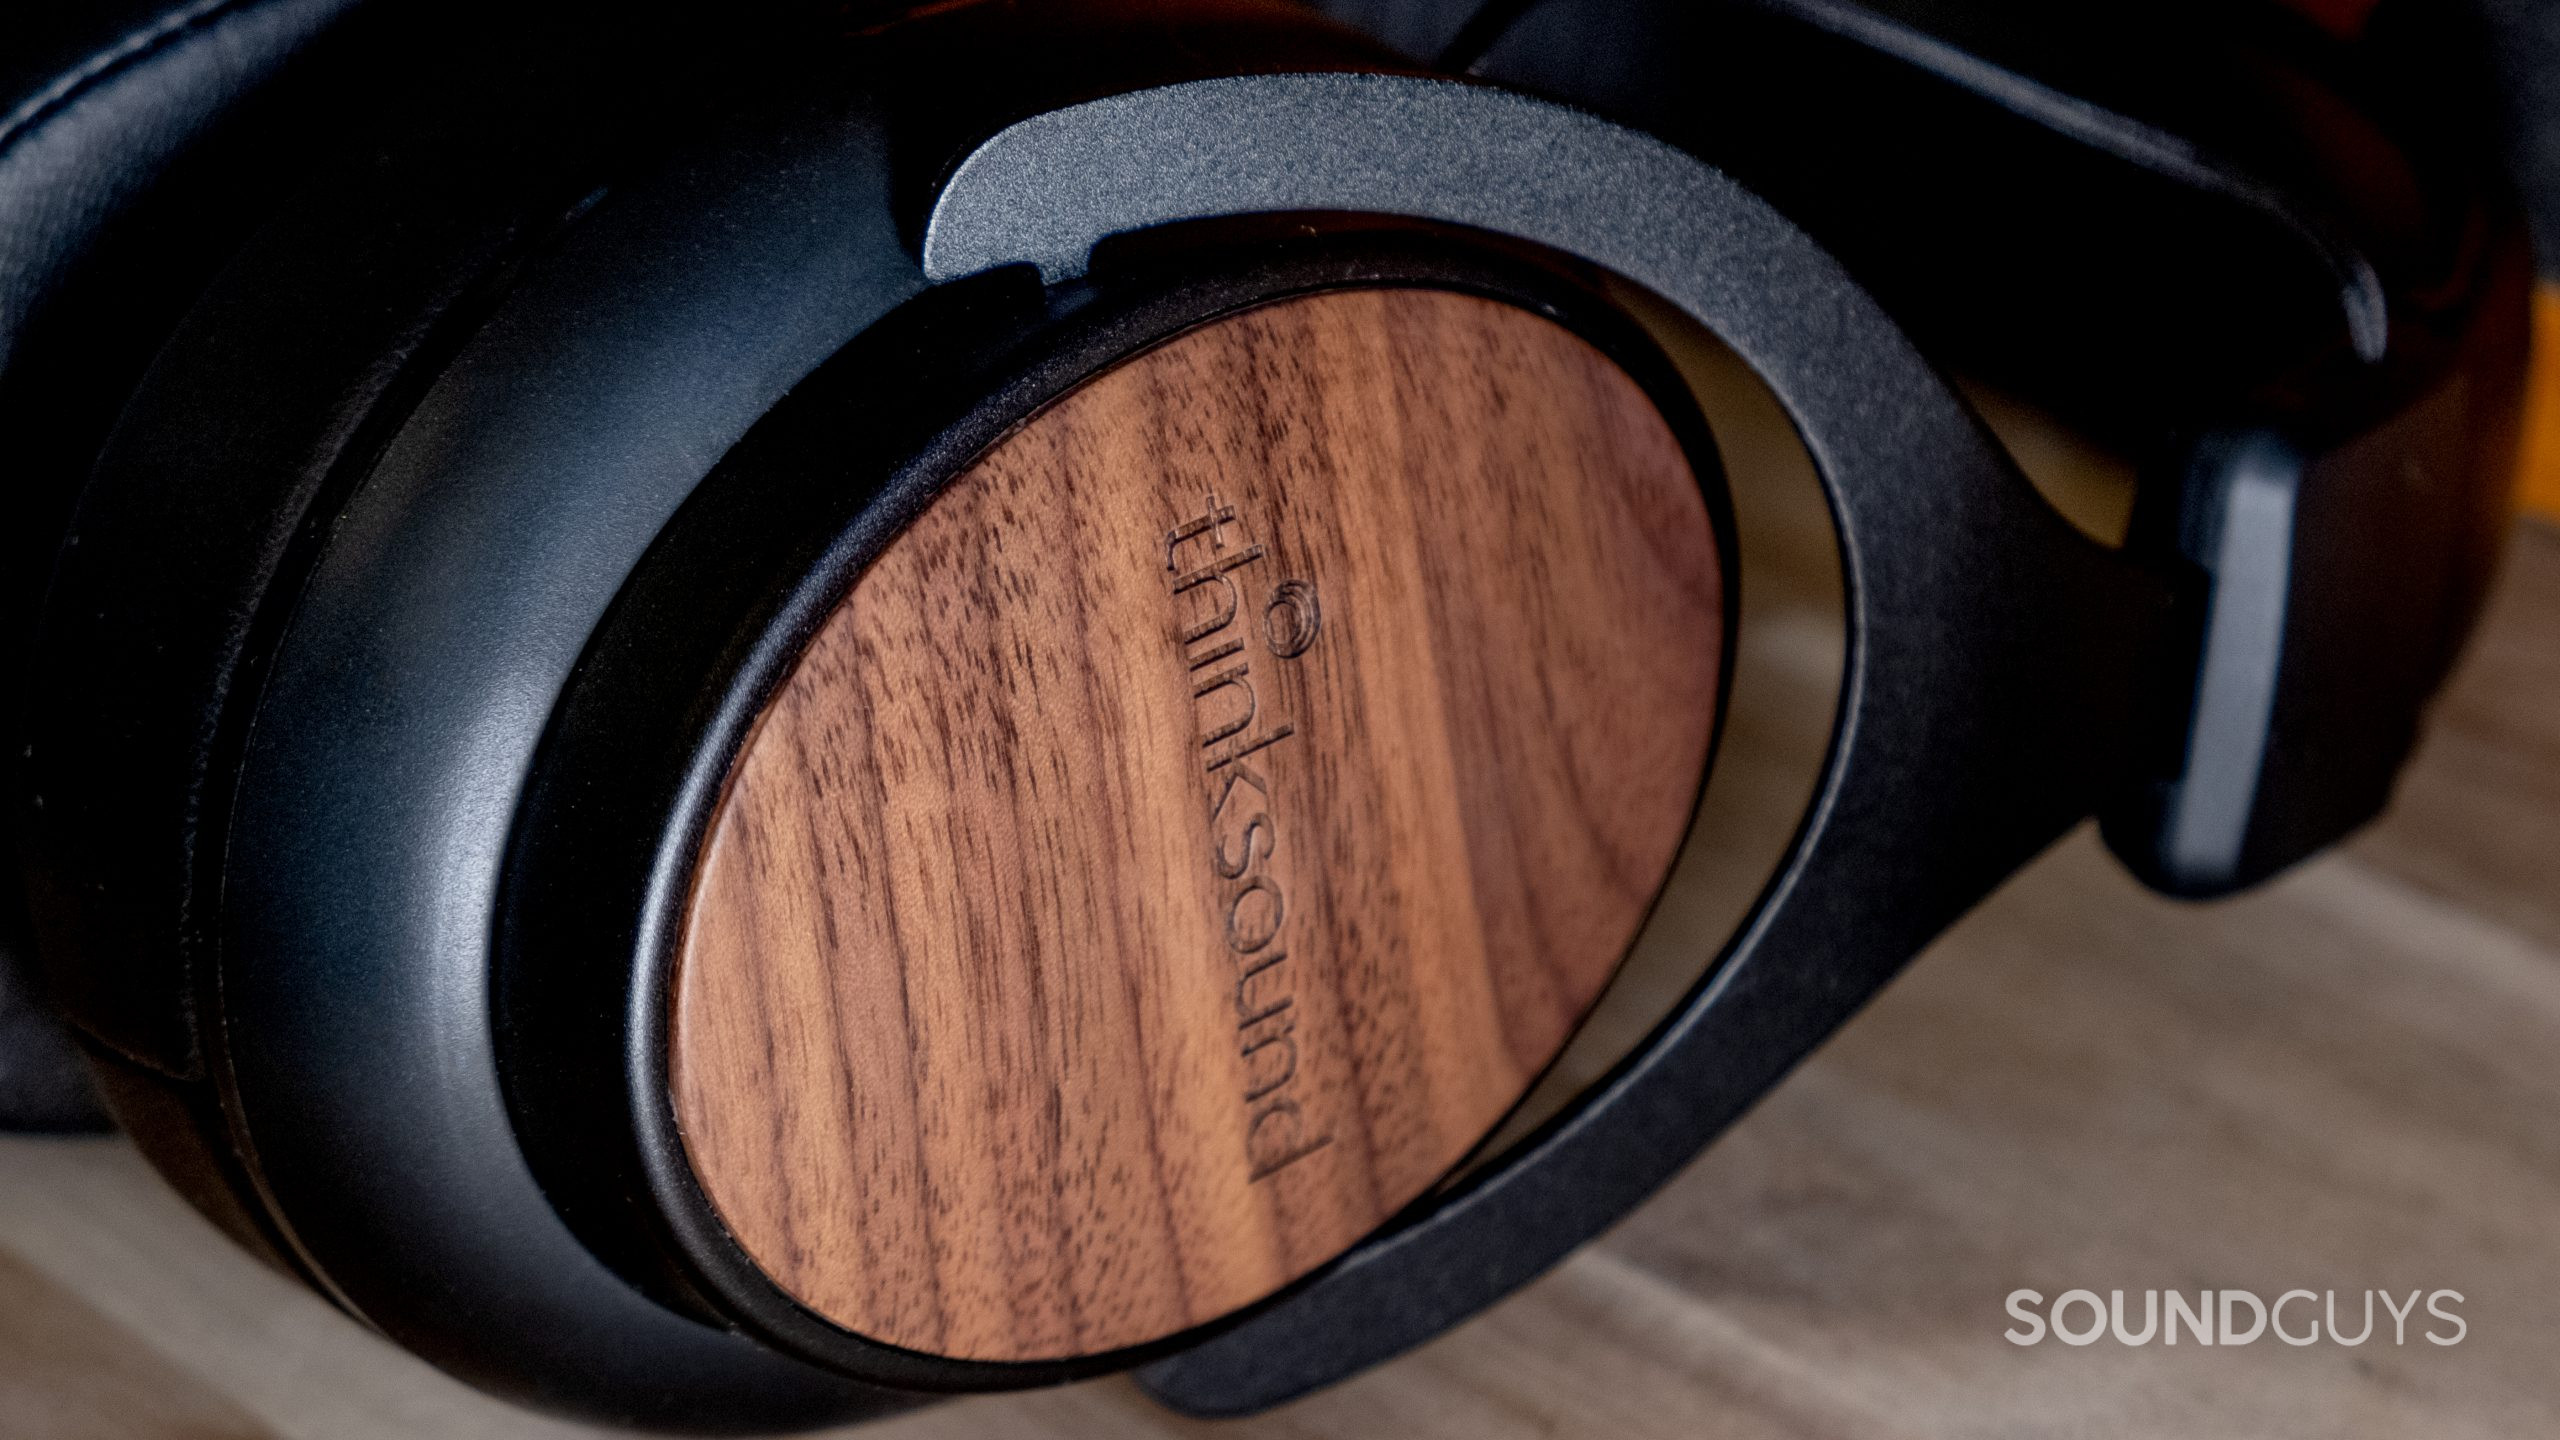 A close up of the Thinksound ov21 showcasing the wood ear cups.